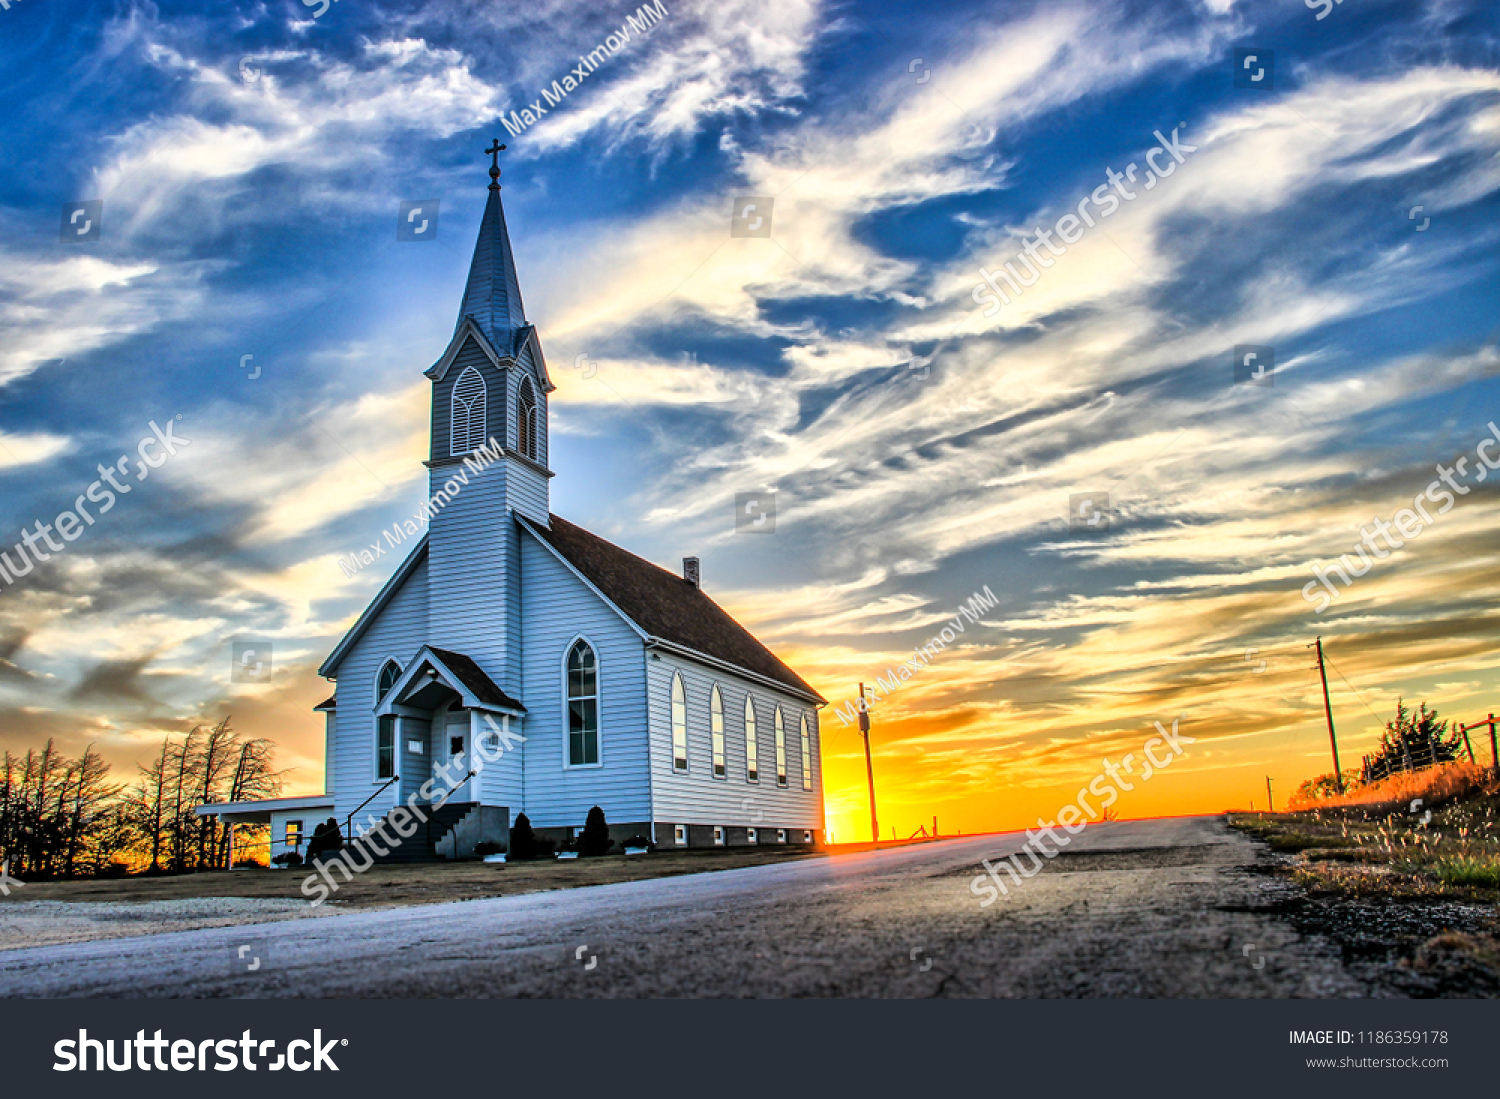 A Lone Wooden Church at Dusk with Sunset Clouds in Kansas American Midwest Prairie #1186359178